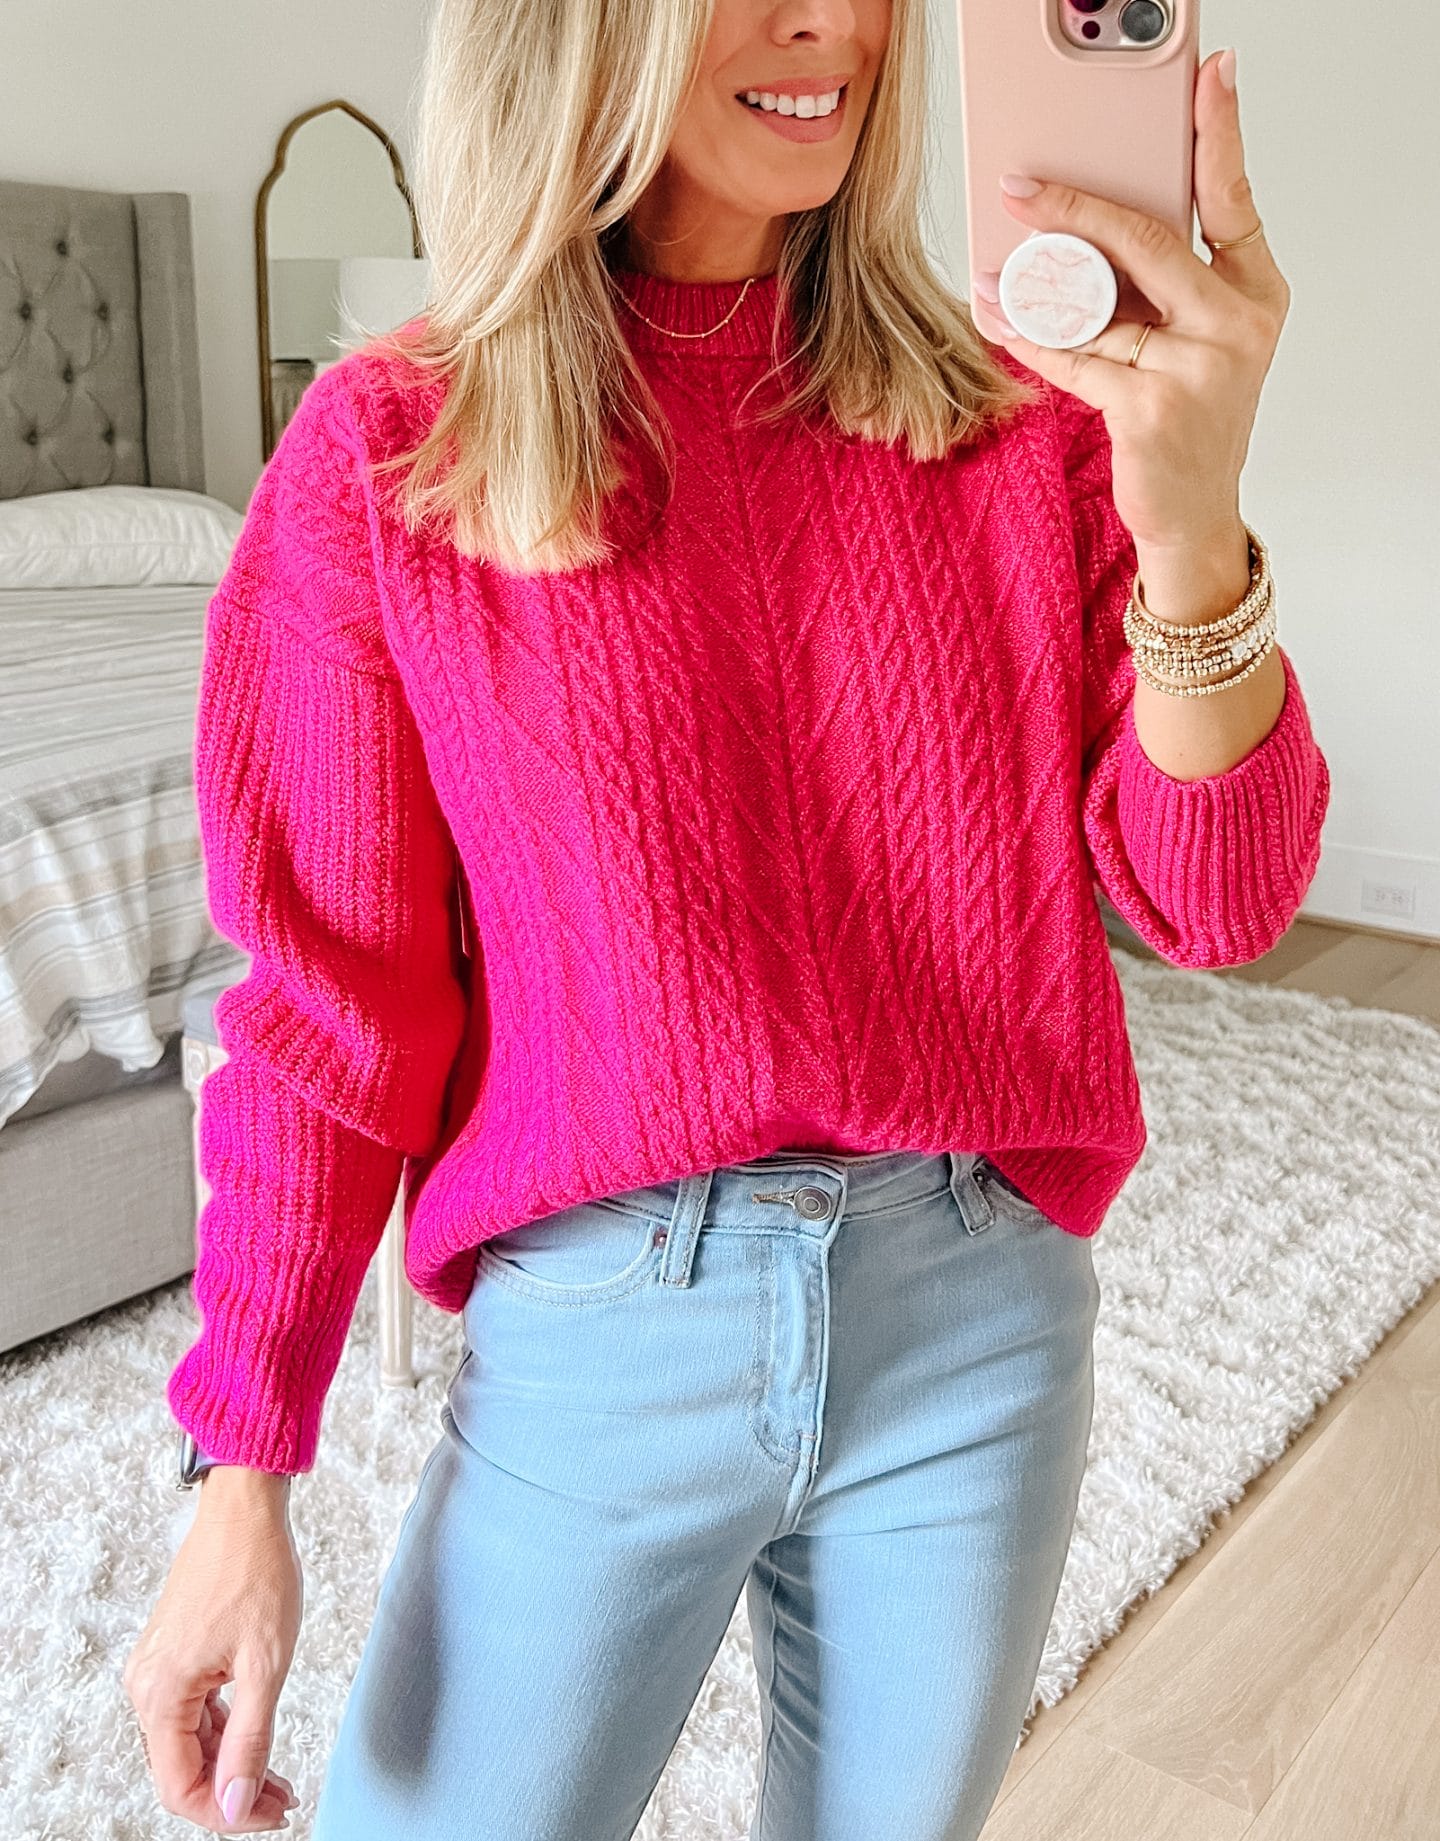 Pink Sweater, Jeans, Booties 